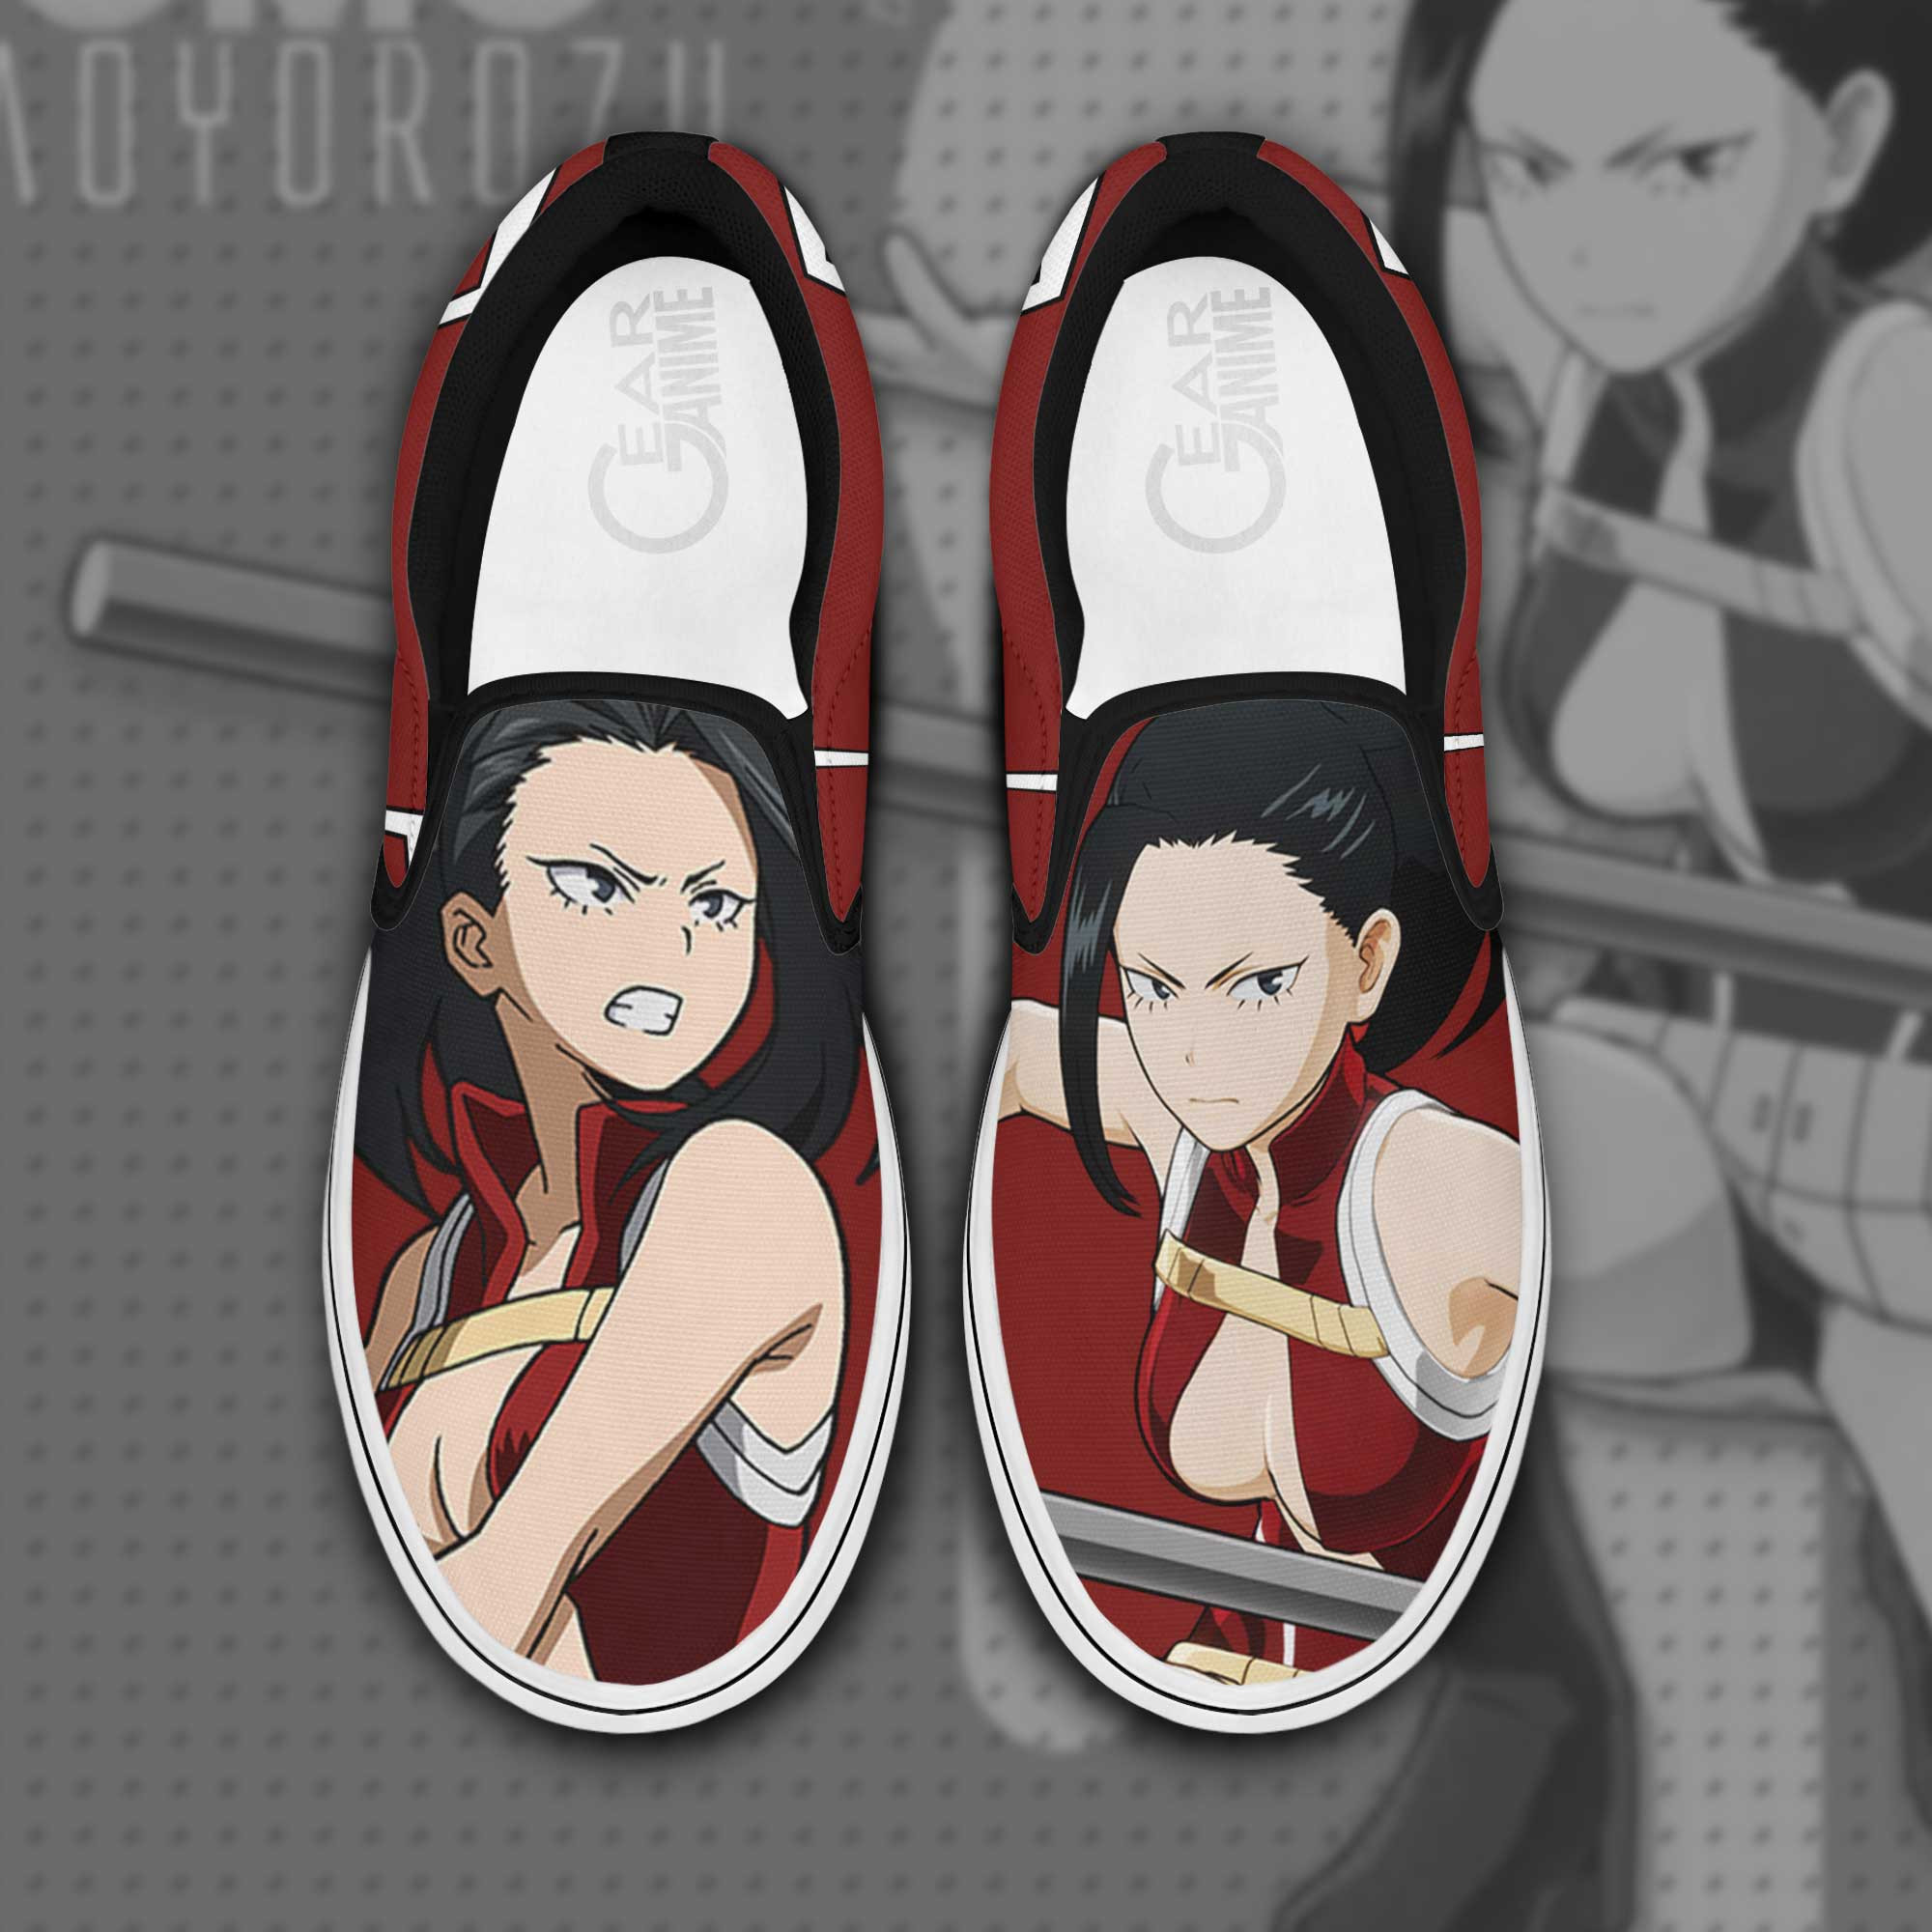 These Sneakers are a must-have for any Anime fan 53